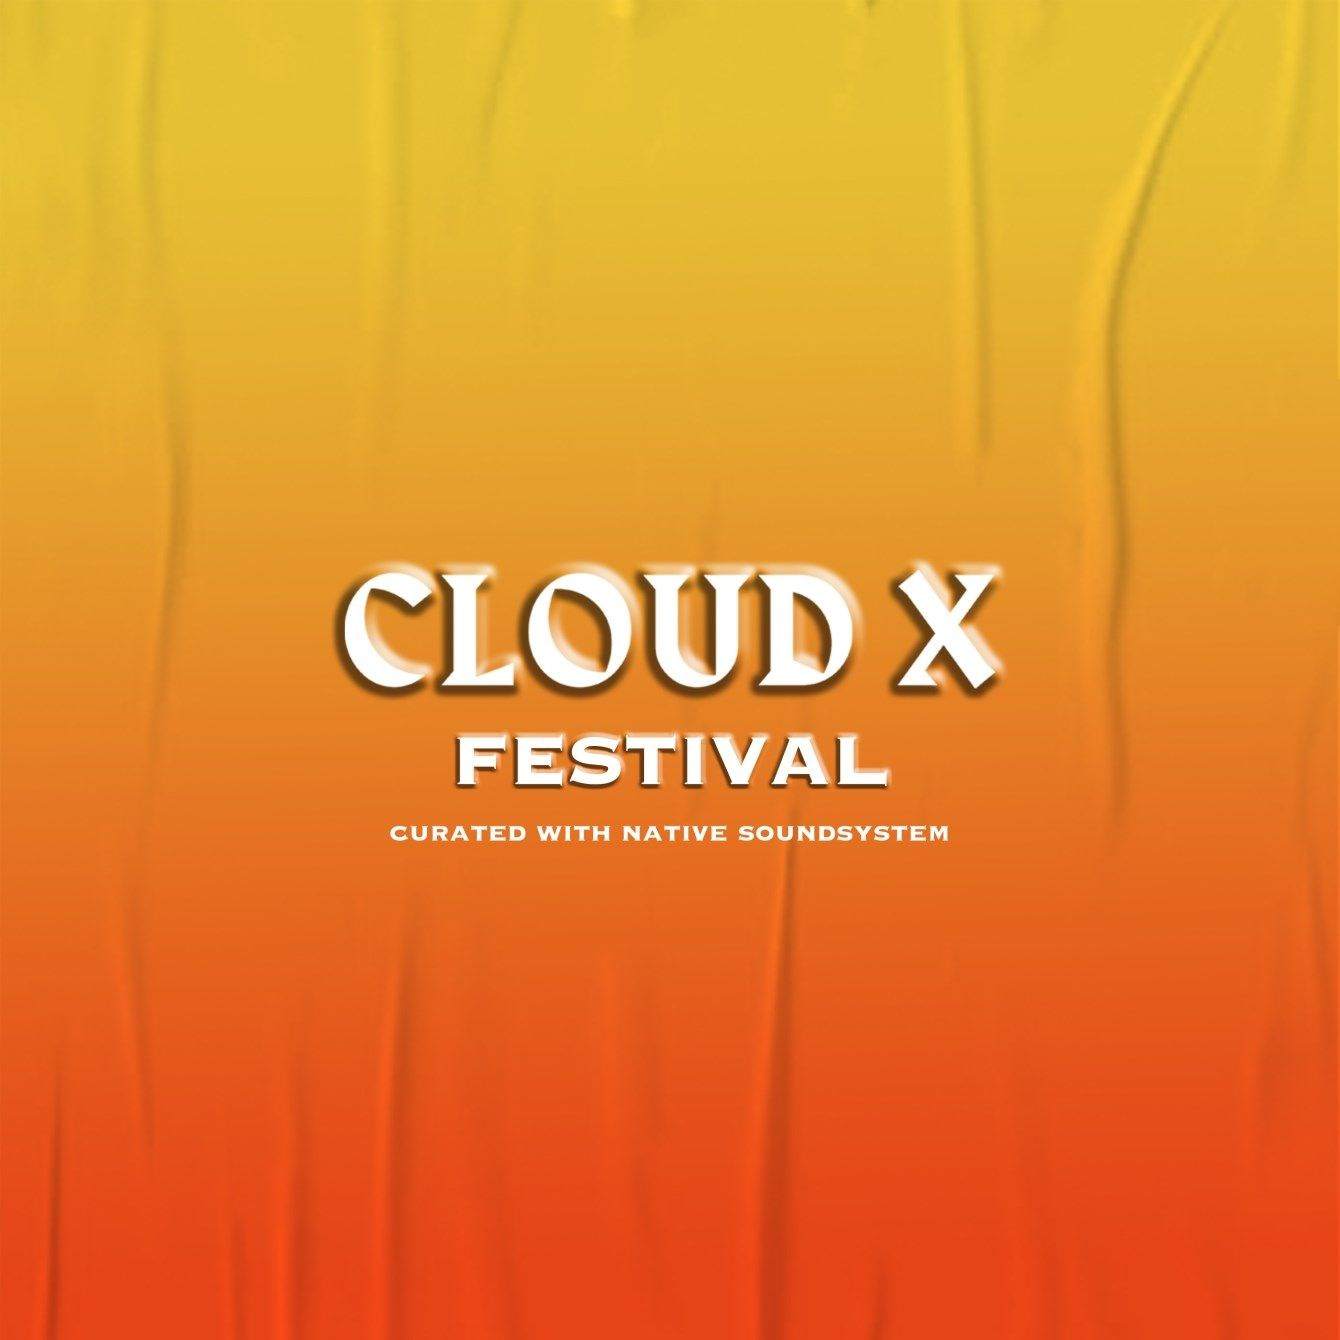 Cloud X Festival (Curated with Native Soundsystem) - Página trasera